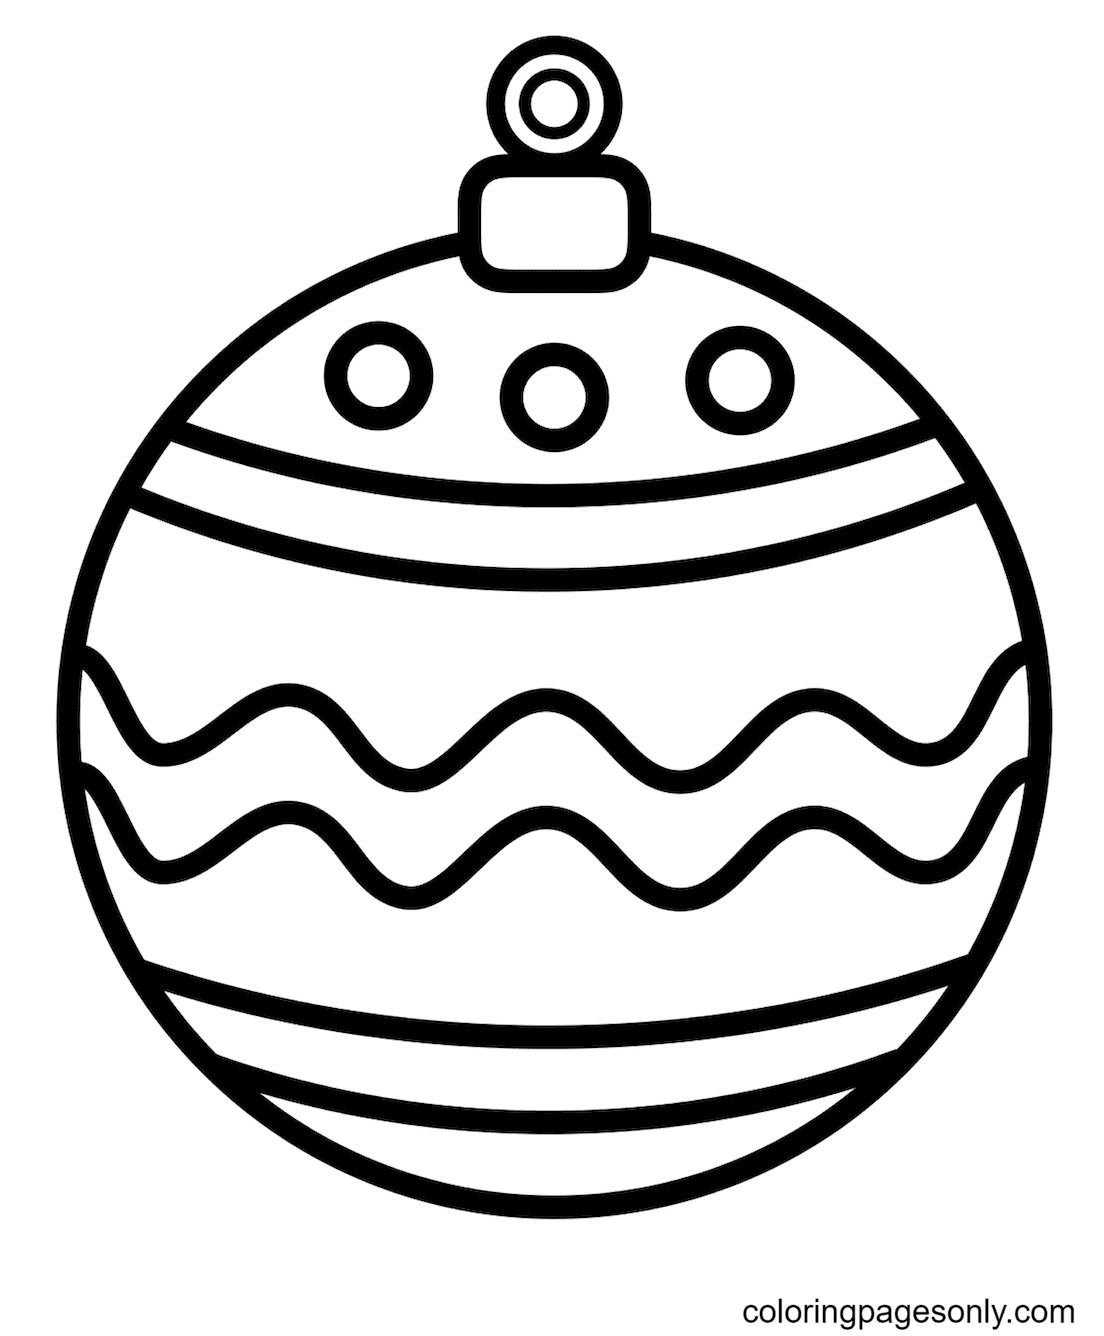 Christmas Ornaments Coloring Pages - Coloring Pages For Kids And Adults